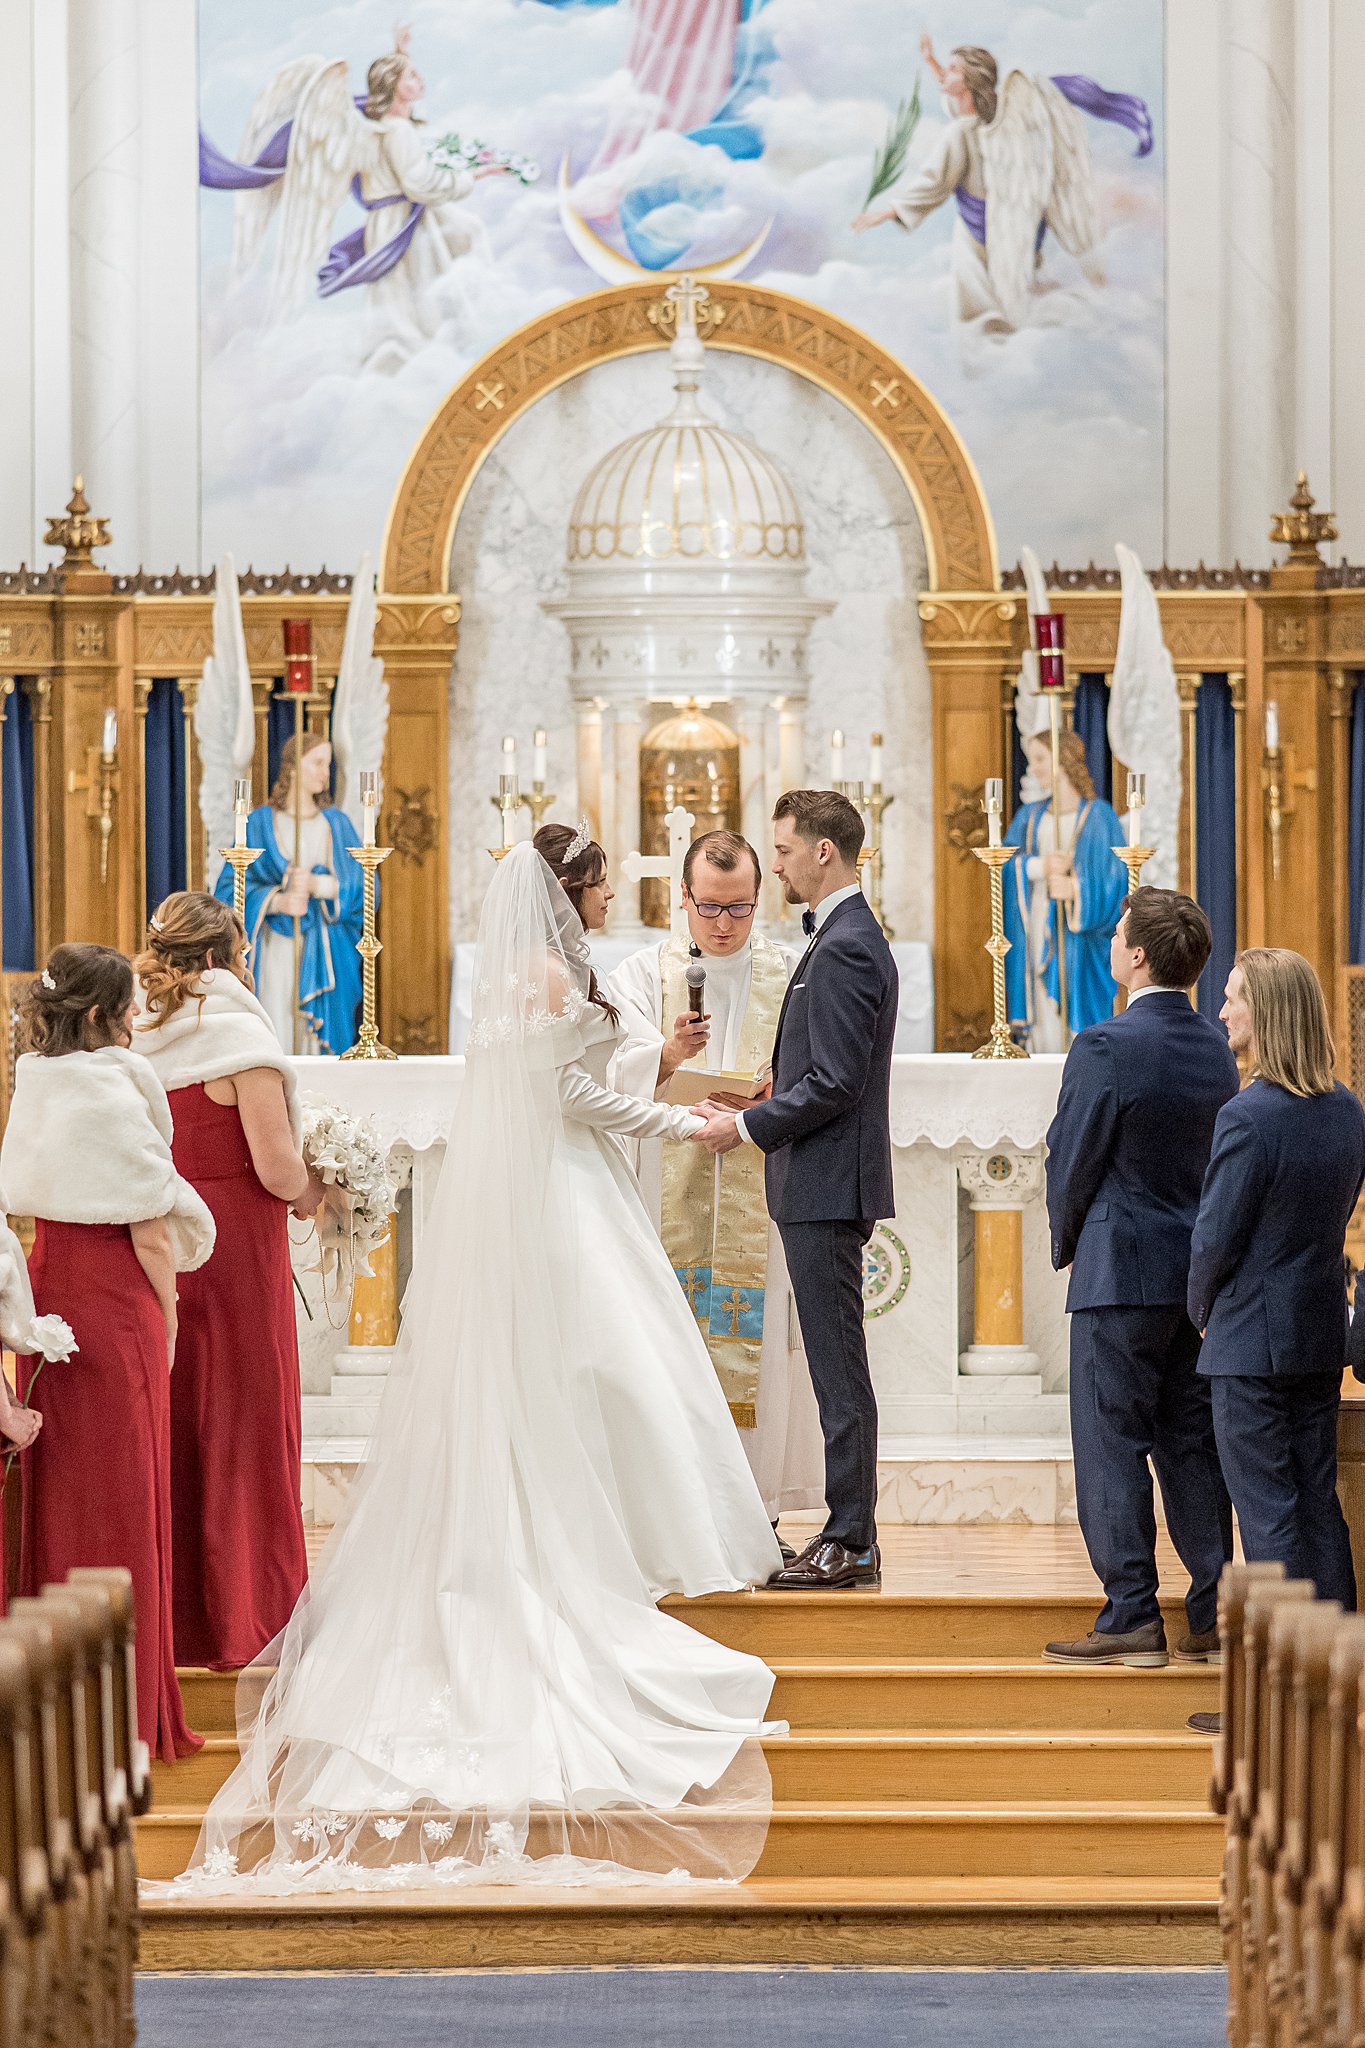 Wedding Ceremony at St. Mary's Cathedral in Fargo ND